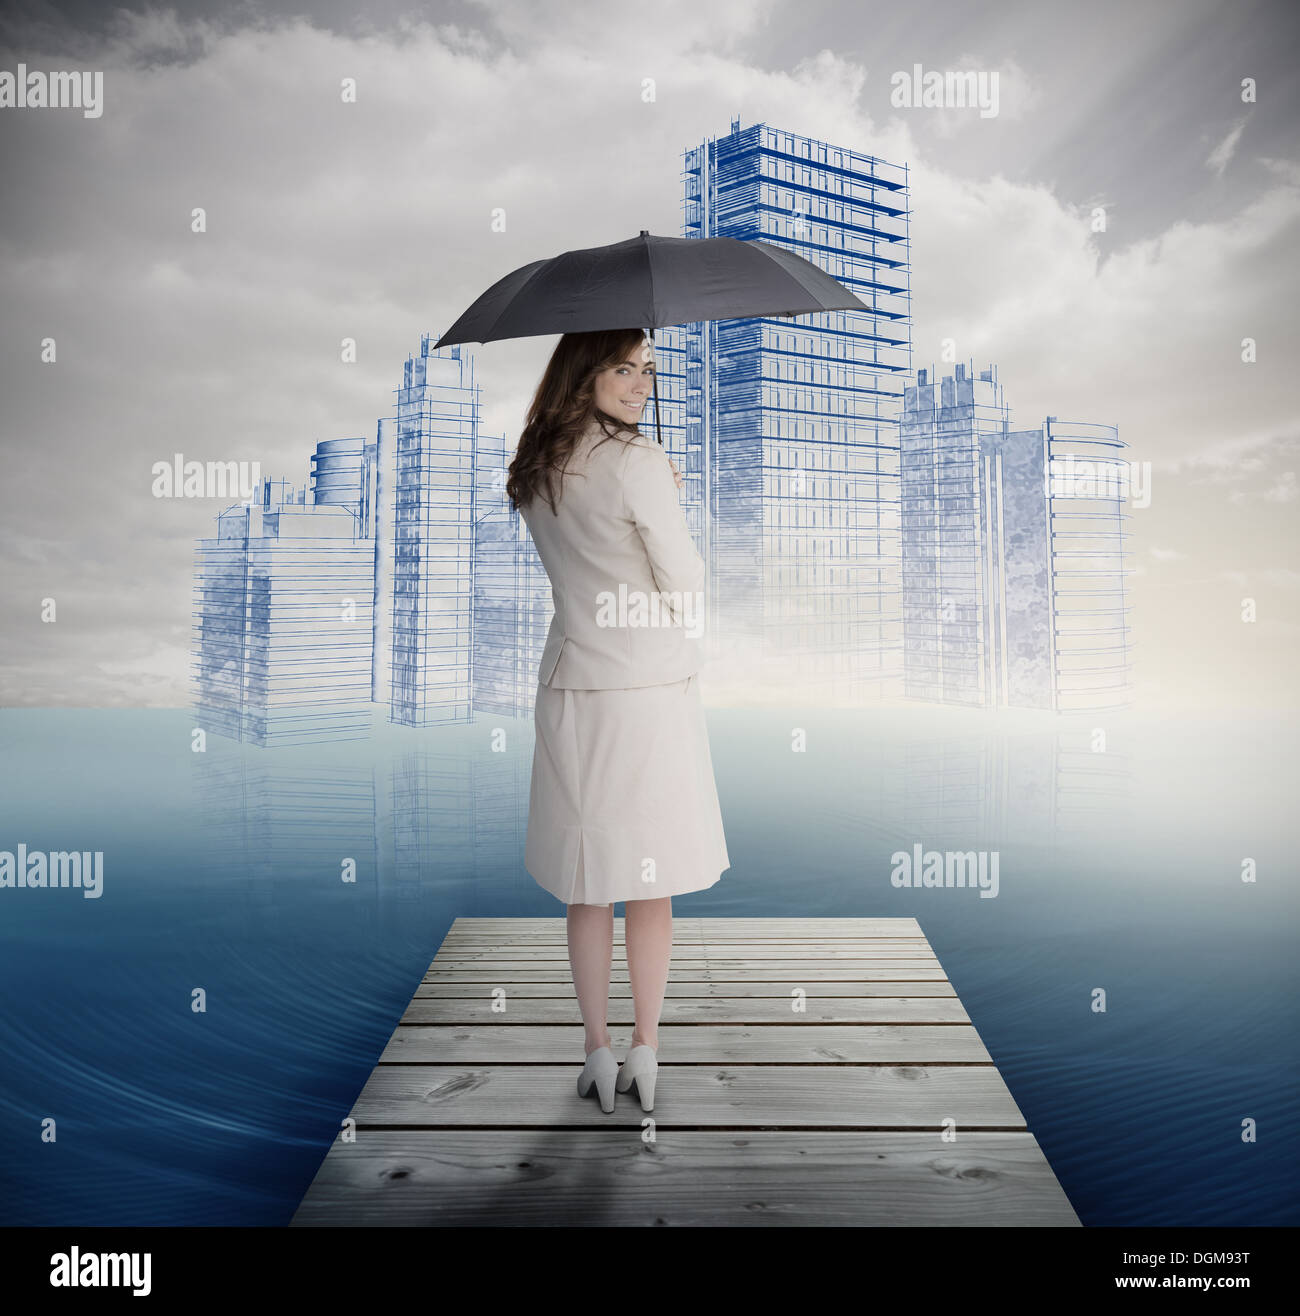 Rear view of businesswoman holding umbrella in front of holographic city Stock Photo